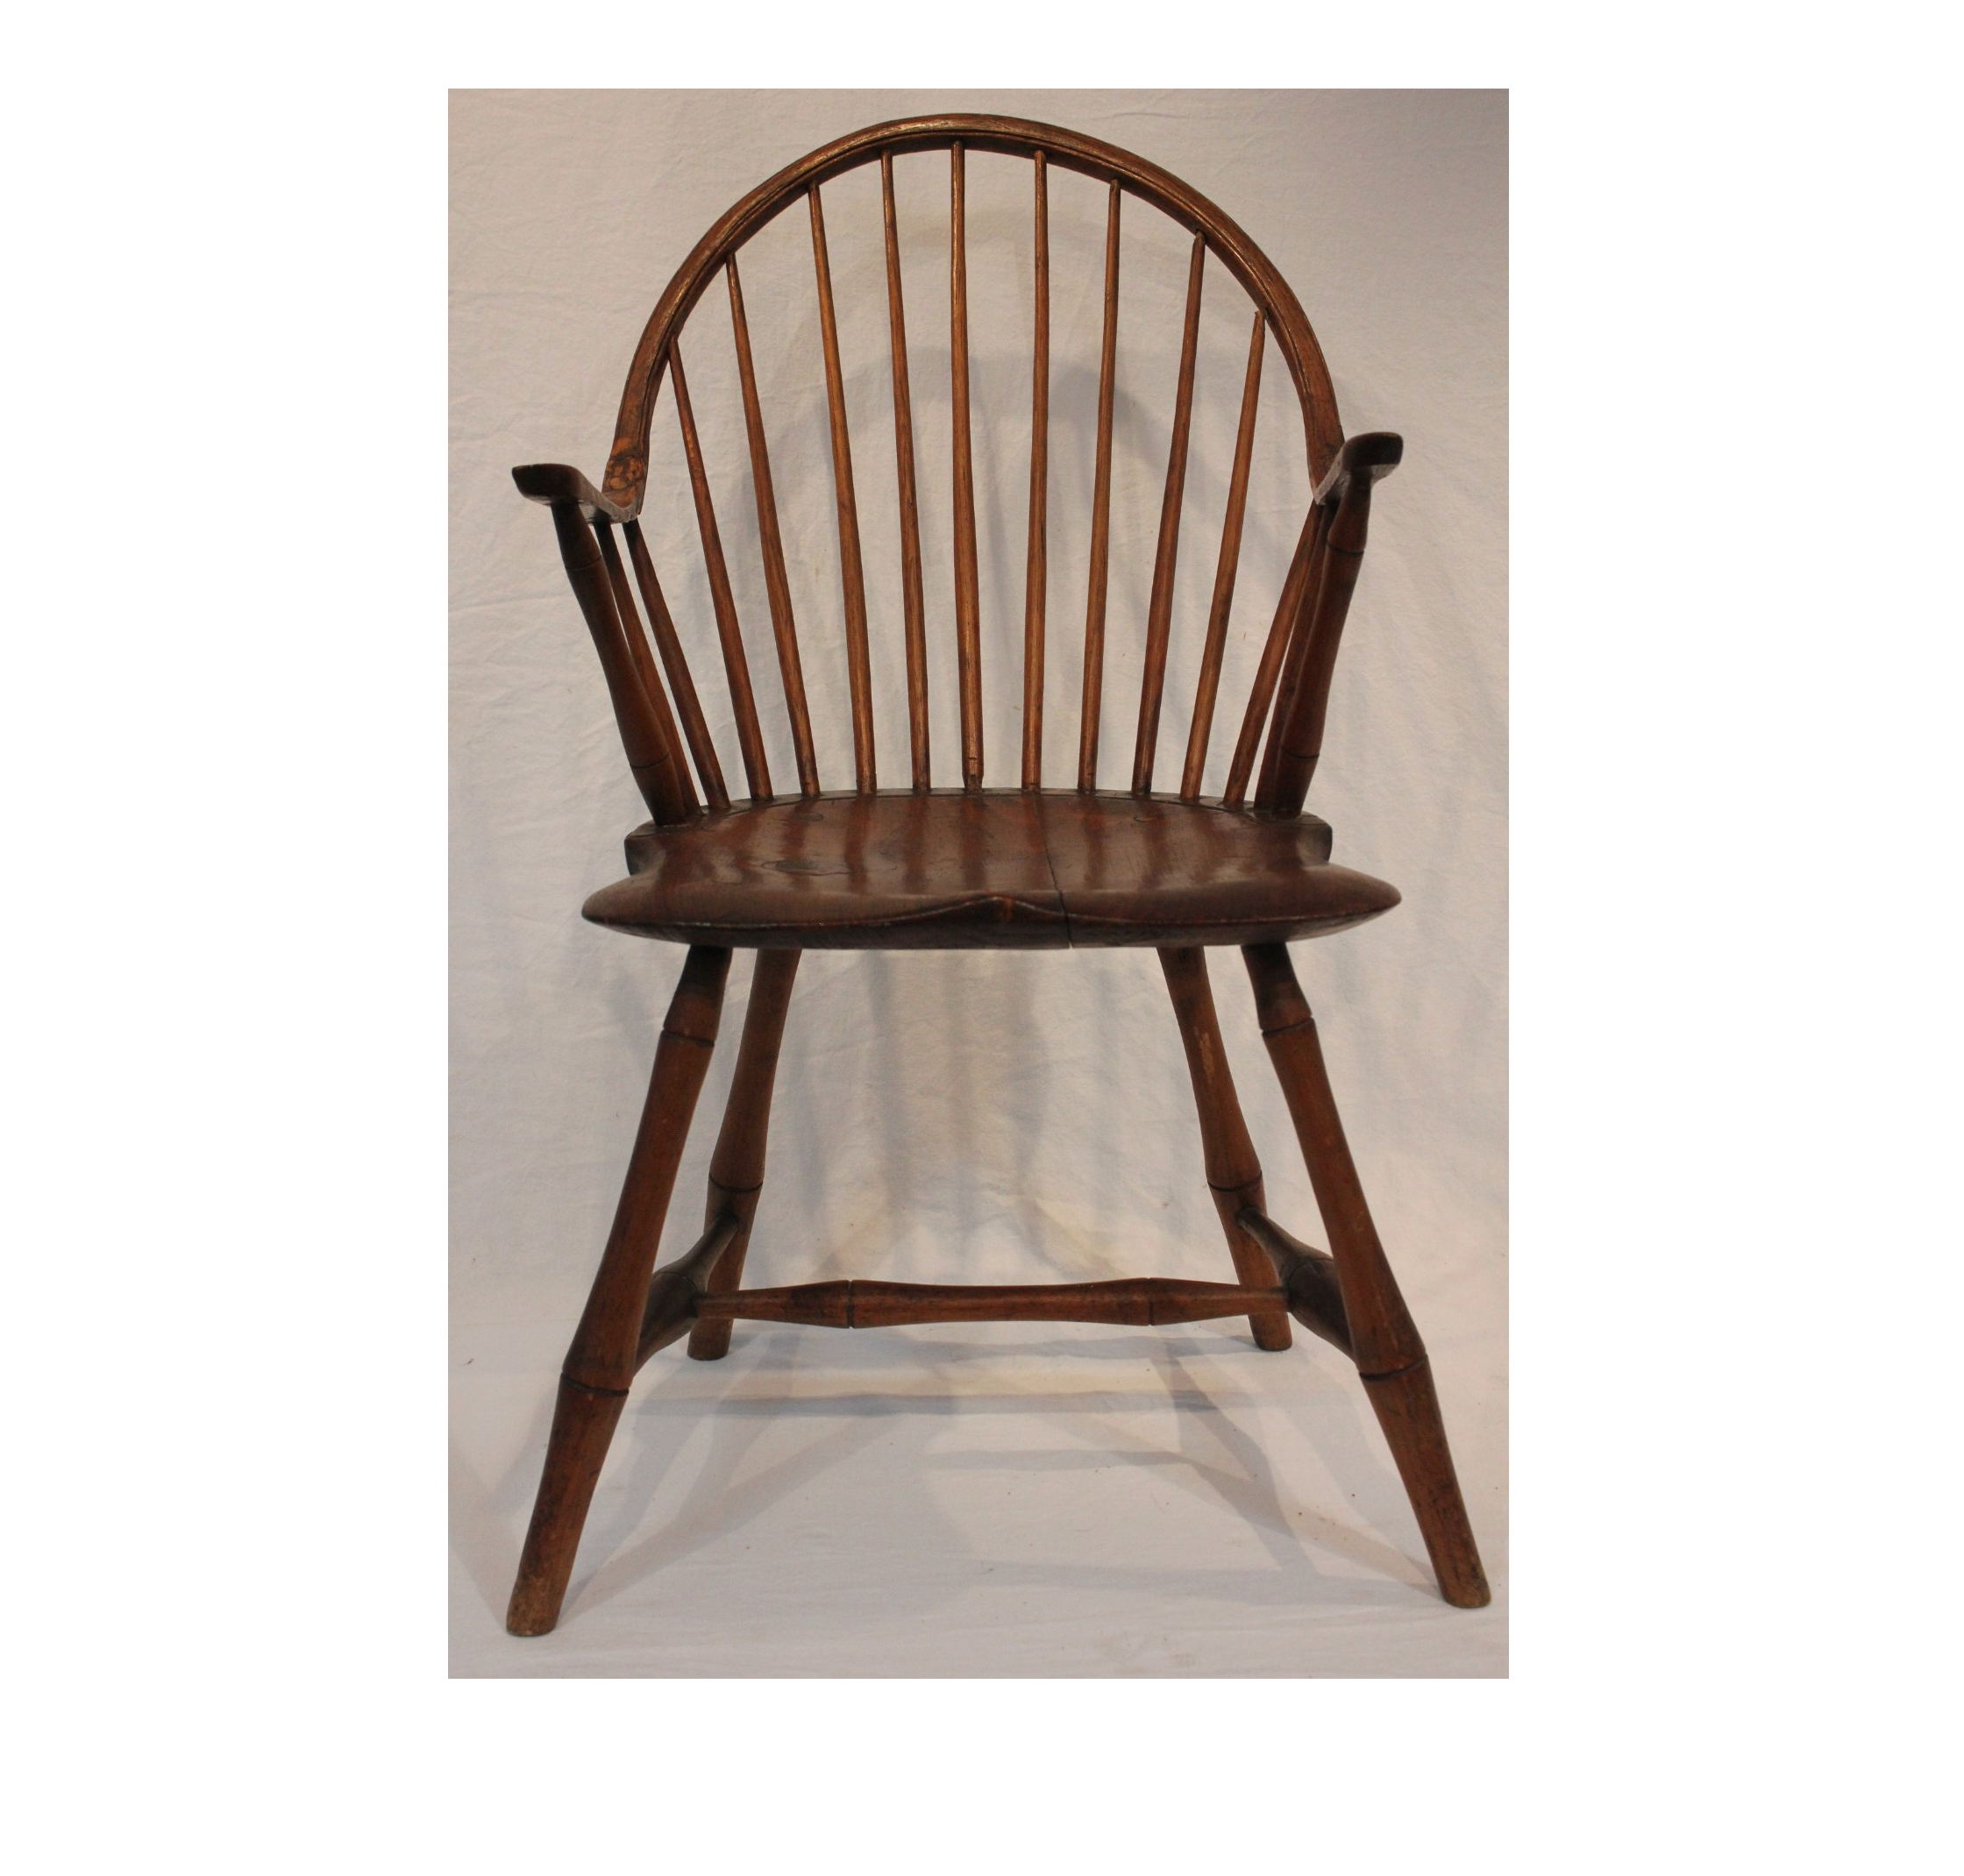 Antique American Windsor Arm Chair